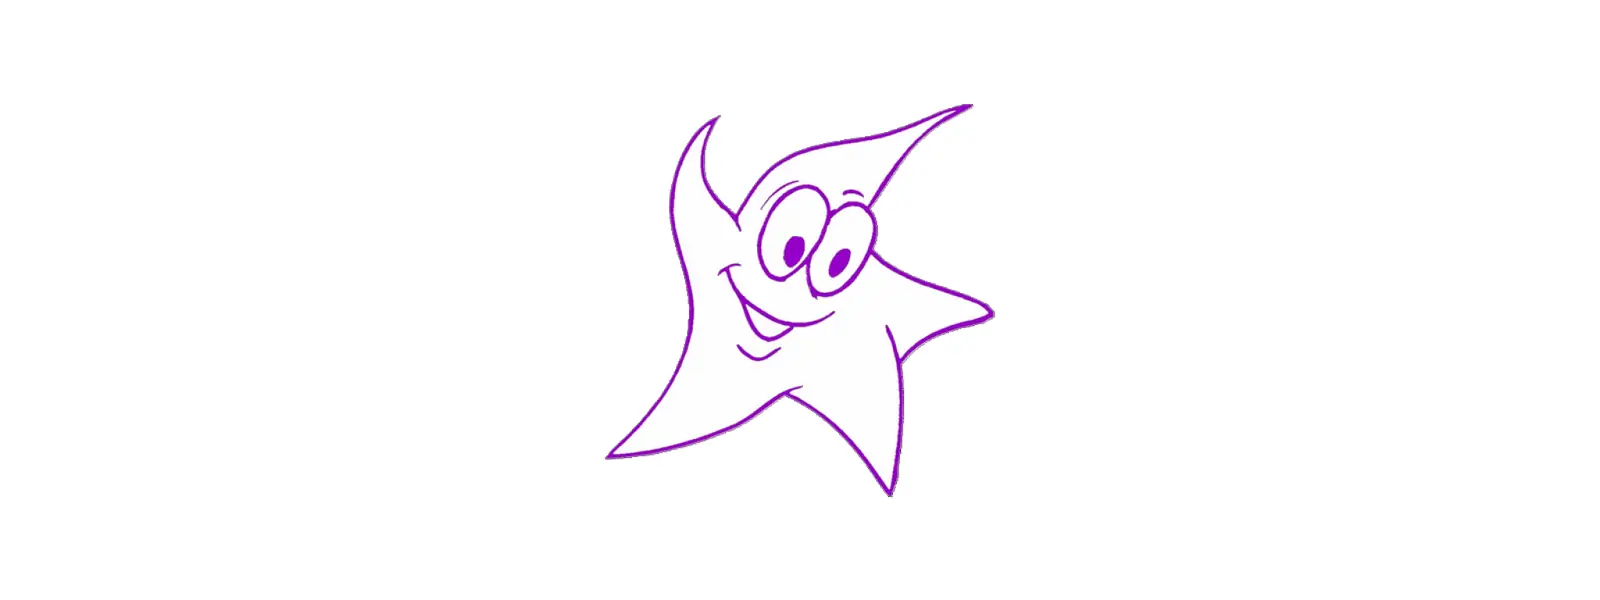 Georgie Star - a cartoon star with eyes and smile - the mascot of the Goulding Method SleepTalk